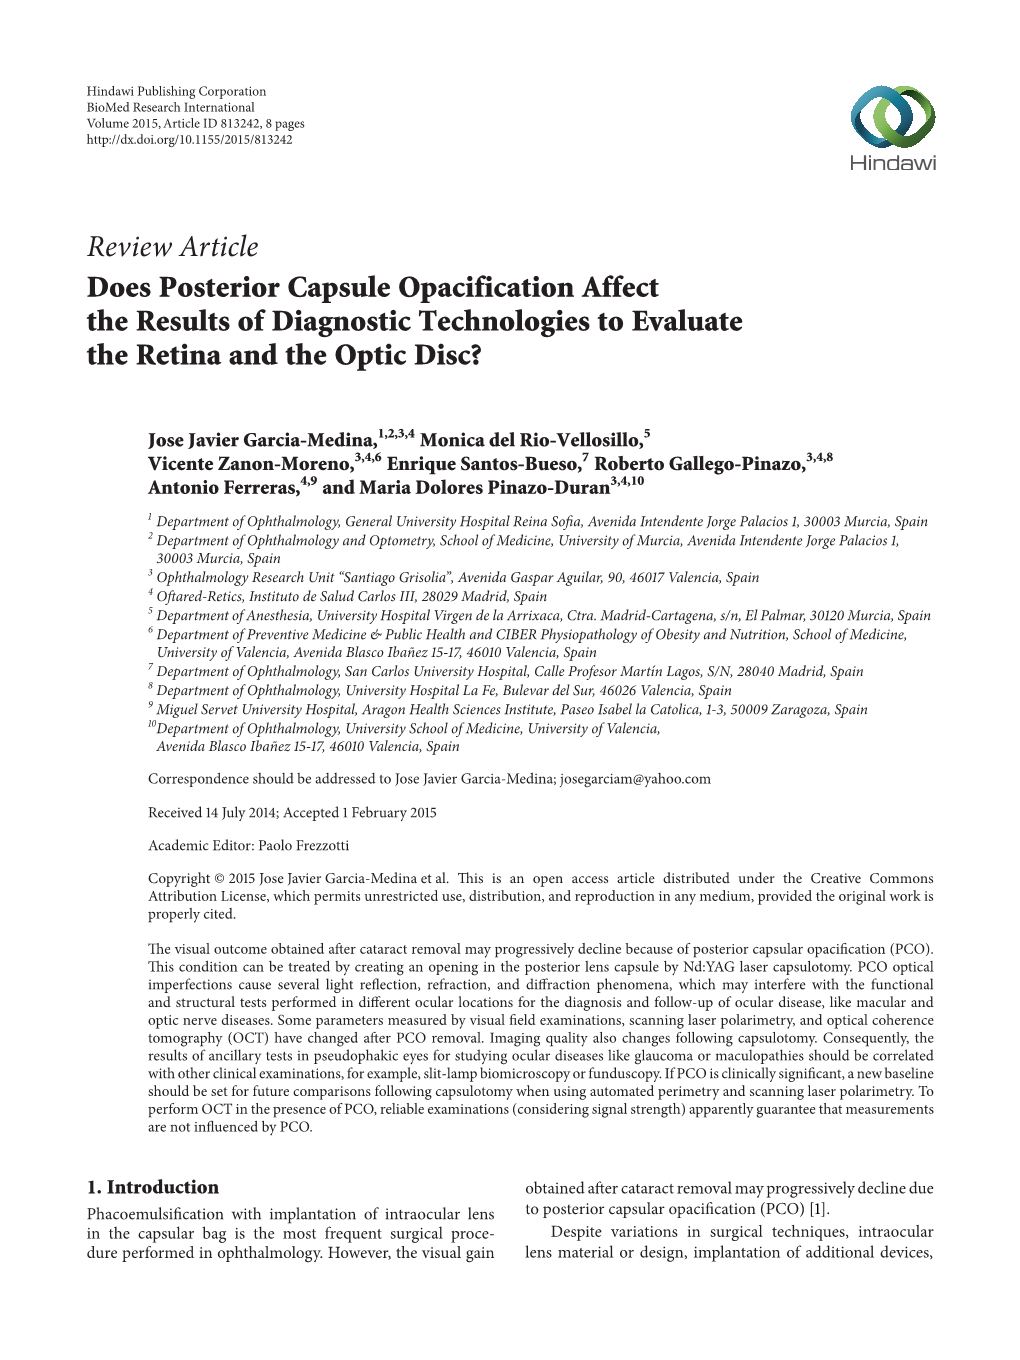 Does Posterior Capsule Opacification Affect the Results of Diagnostic Technologies to Evaluate the Retina and the Optic Disc?